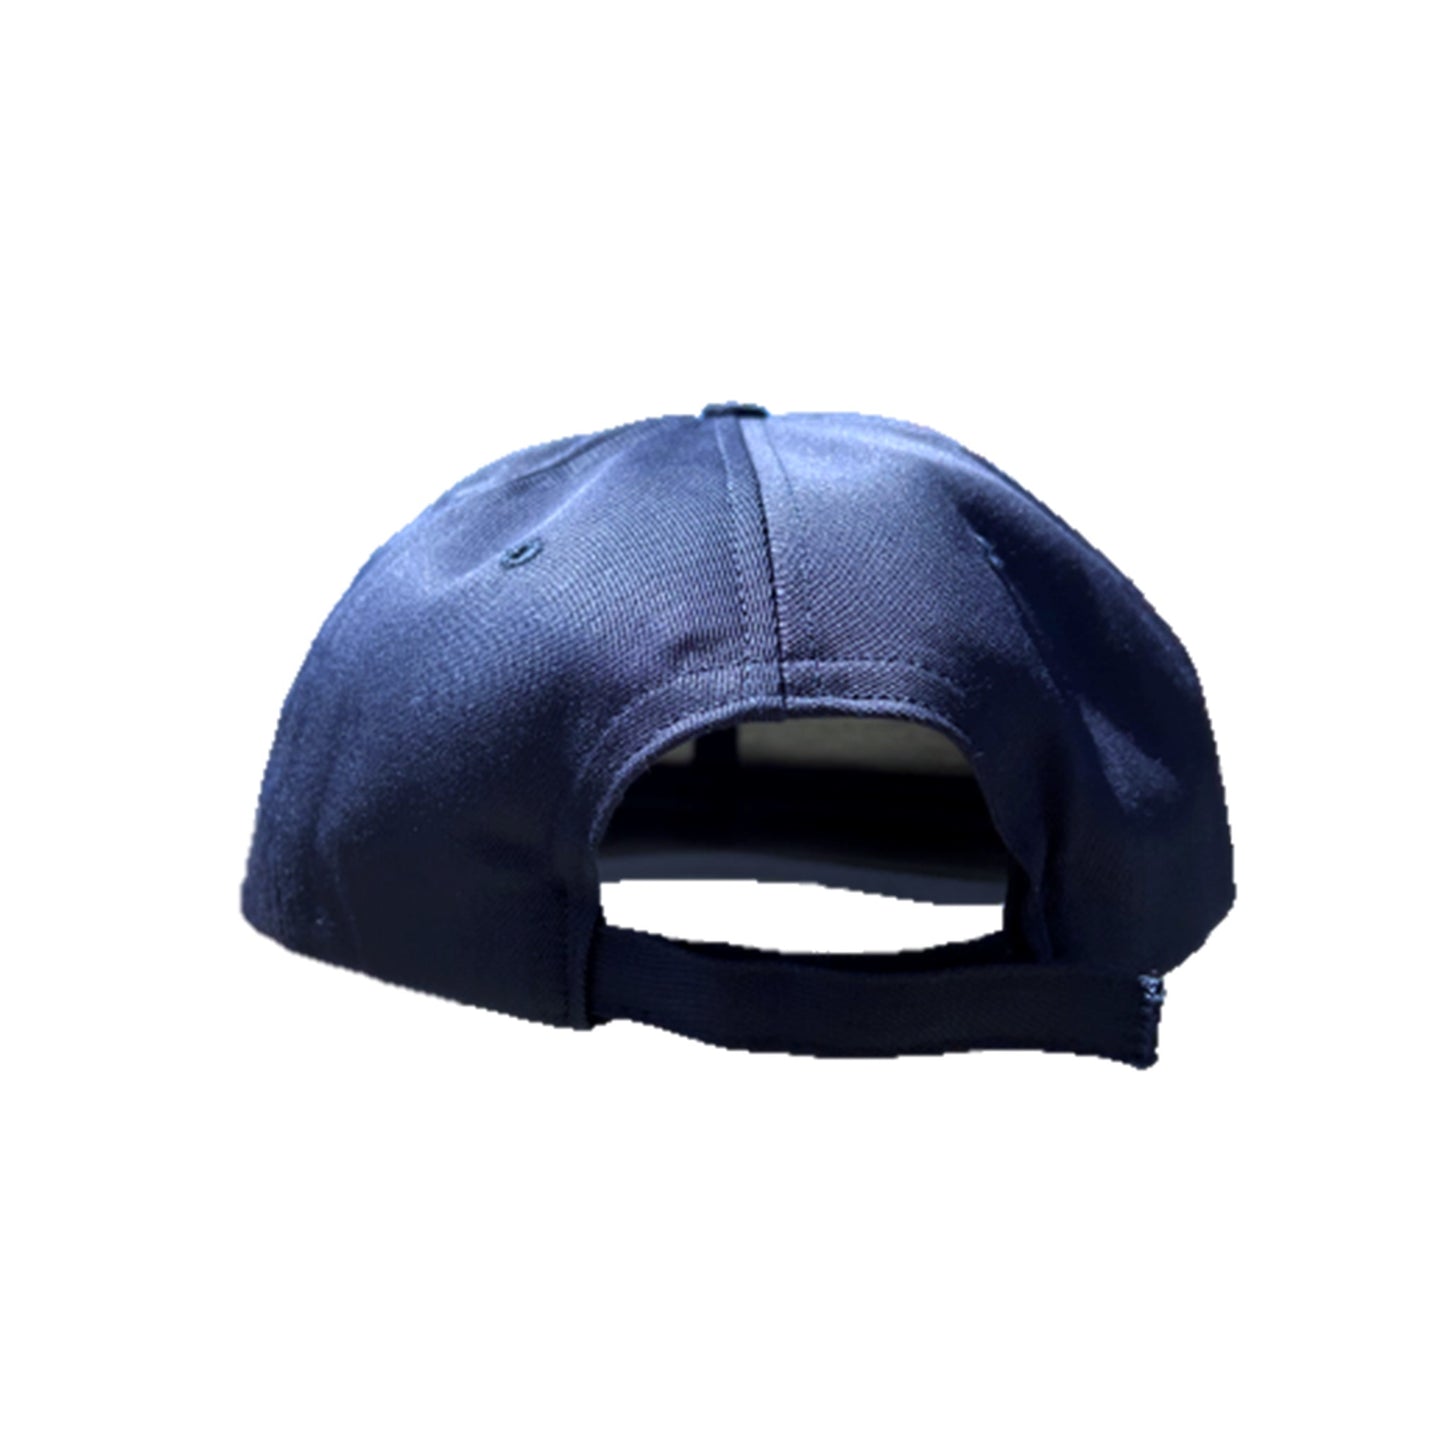 Air Force Blue Baseball Cap (for wear with ABU's) USA Made